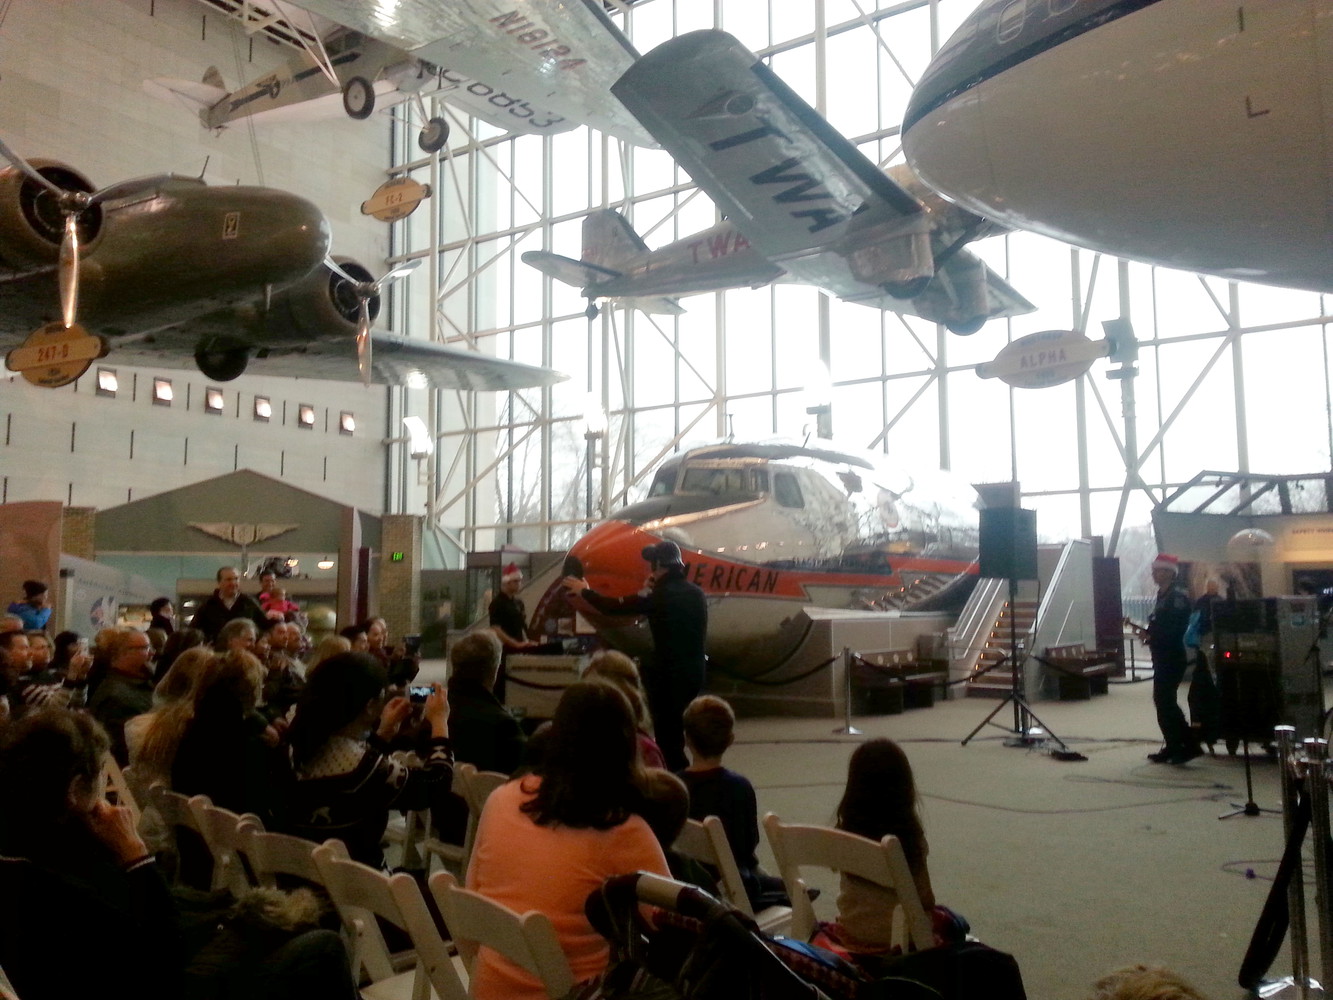 The US Navy Band playing musical instruments and performing in front of an audience at the National Air and Space Museum